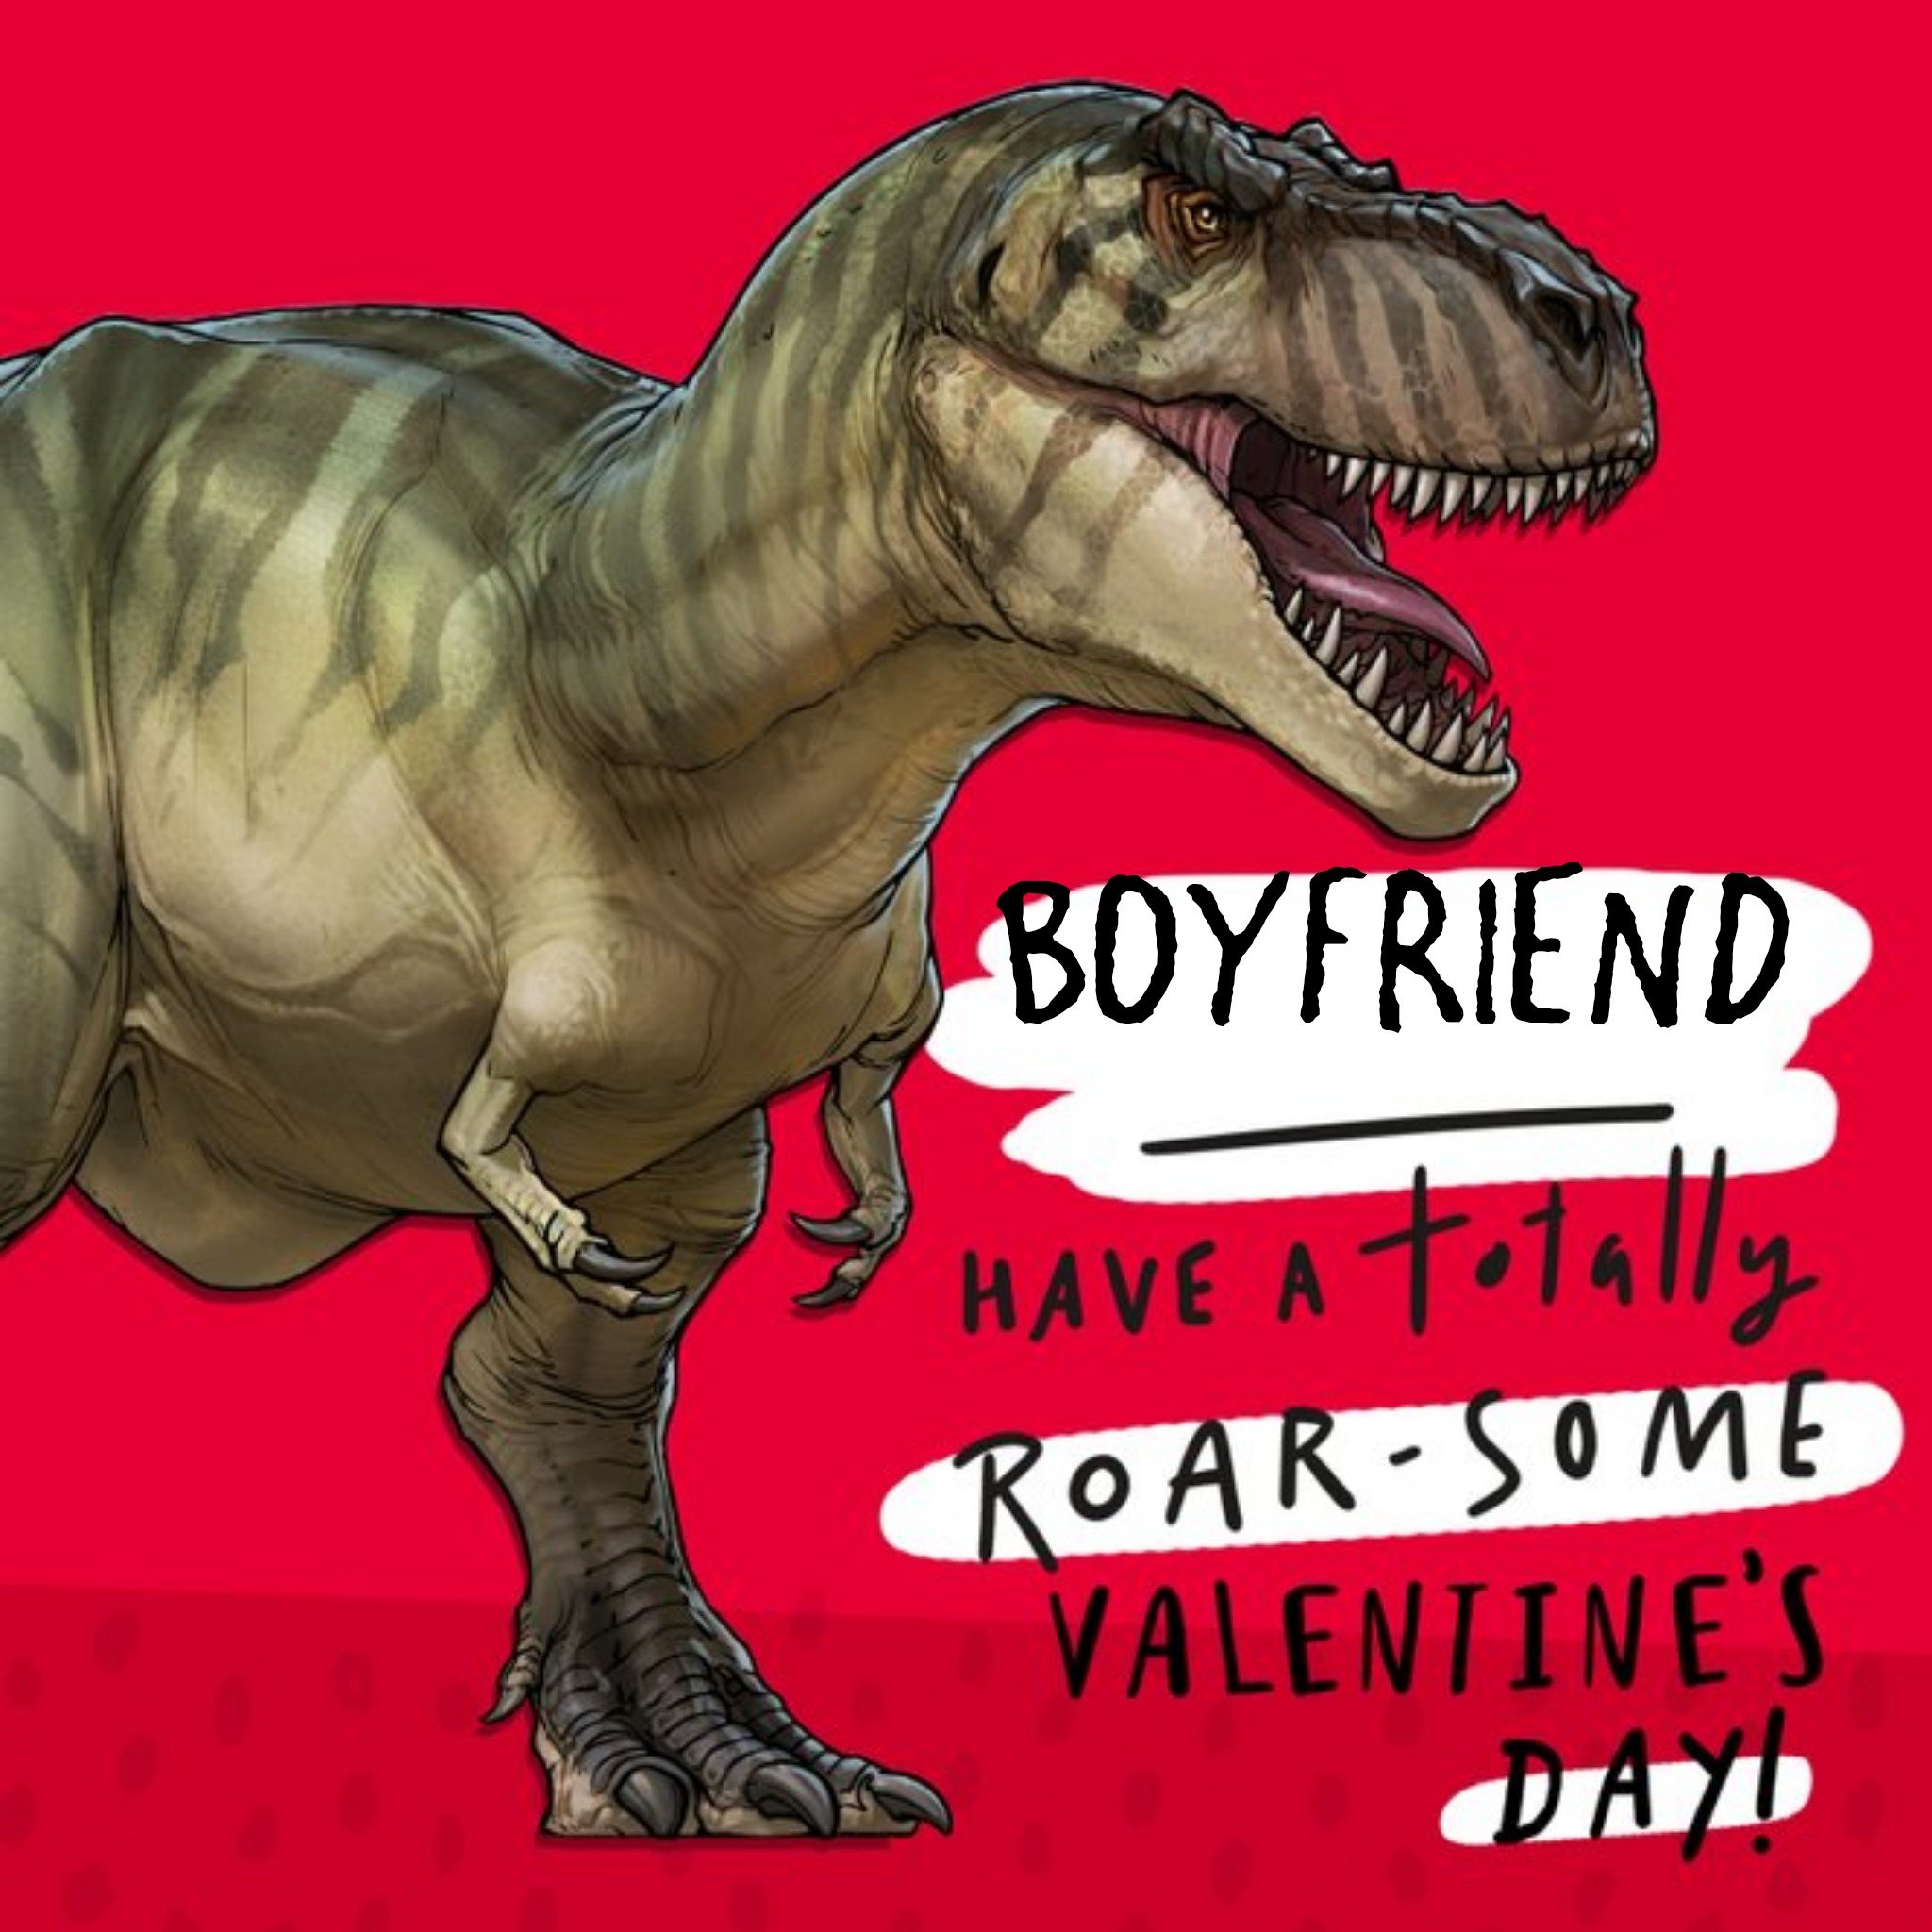 The Natural History Museum T-Rex Have A Roar-Some Valentine's Day Boyfriend Square Card